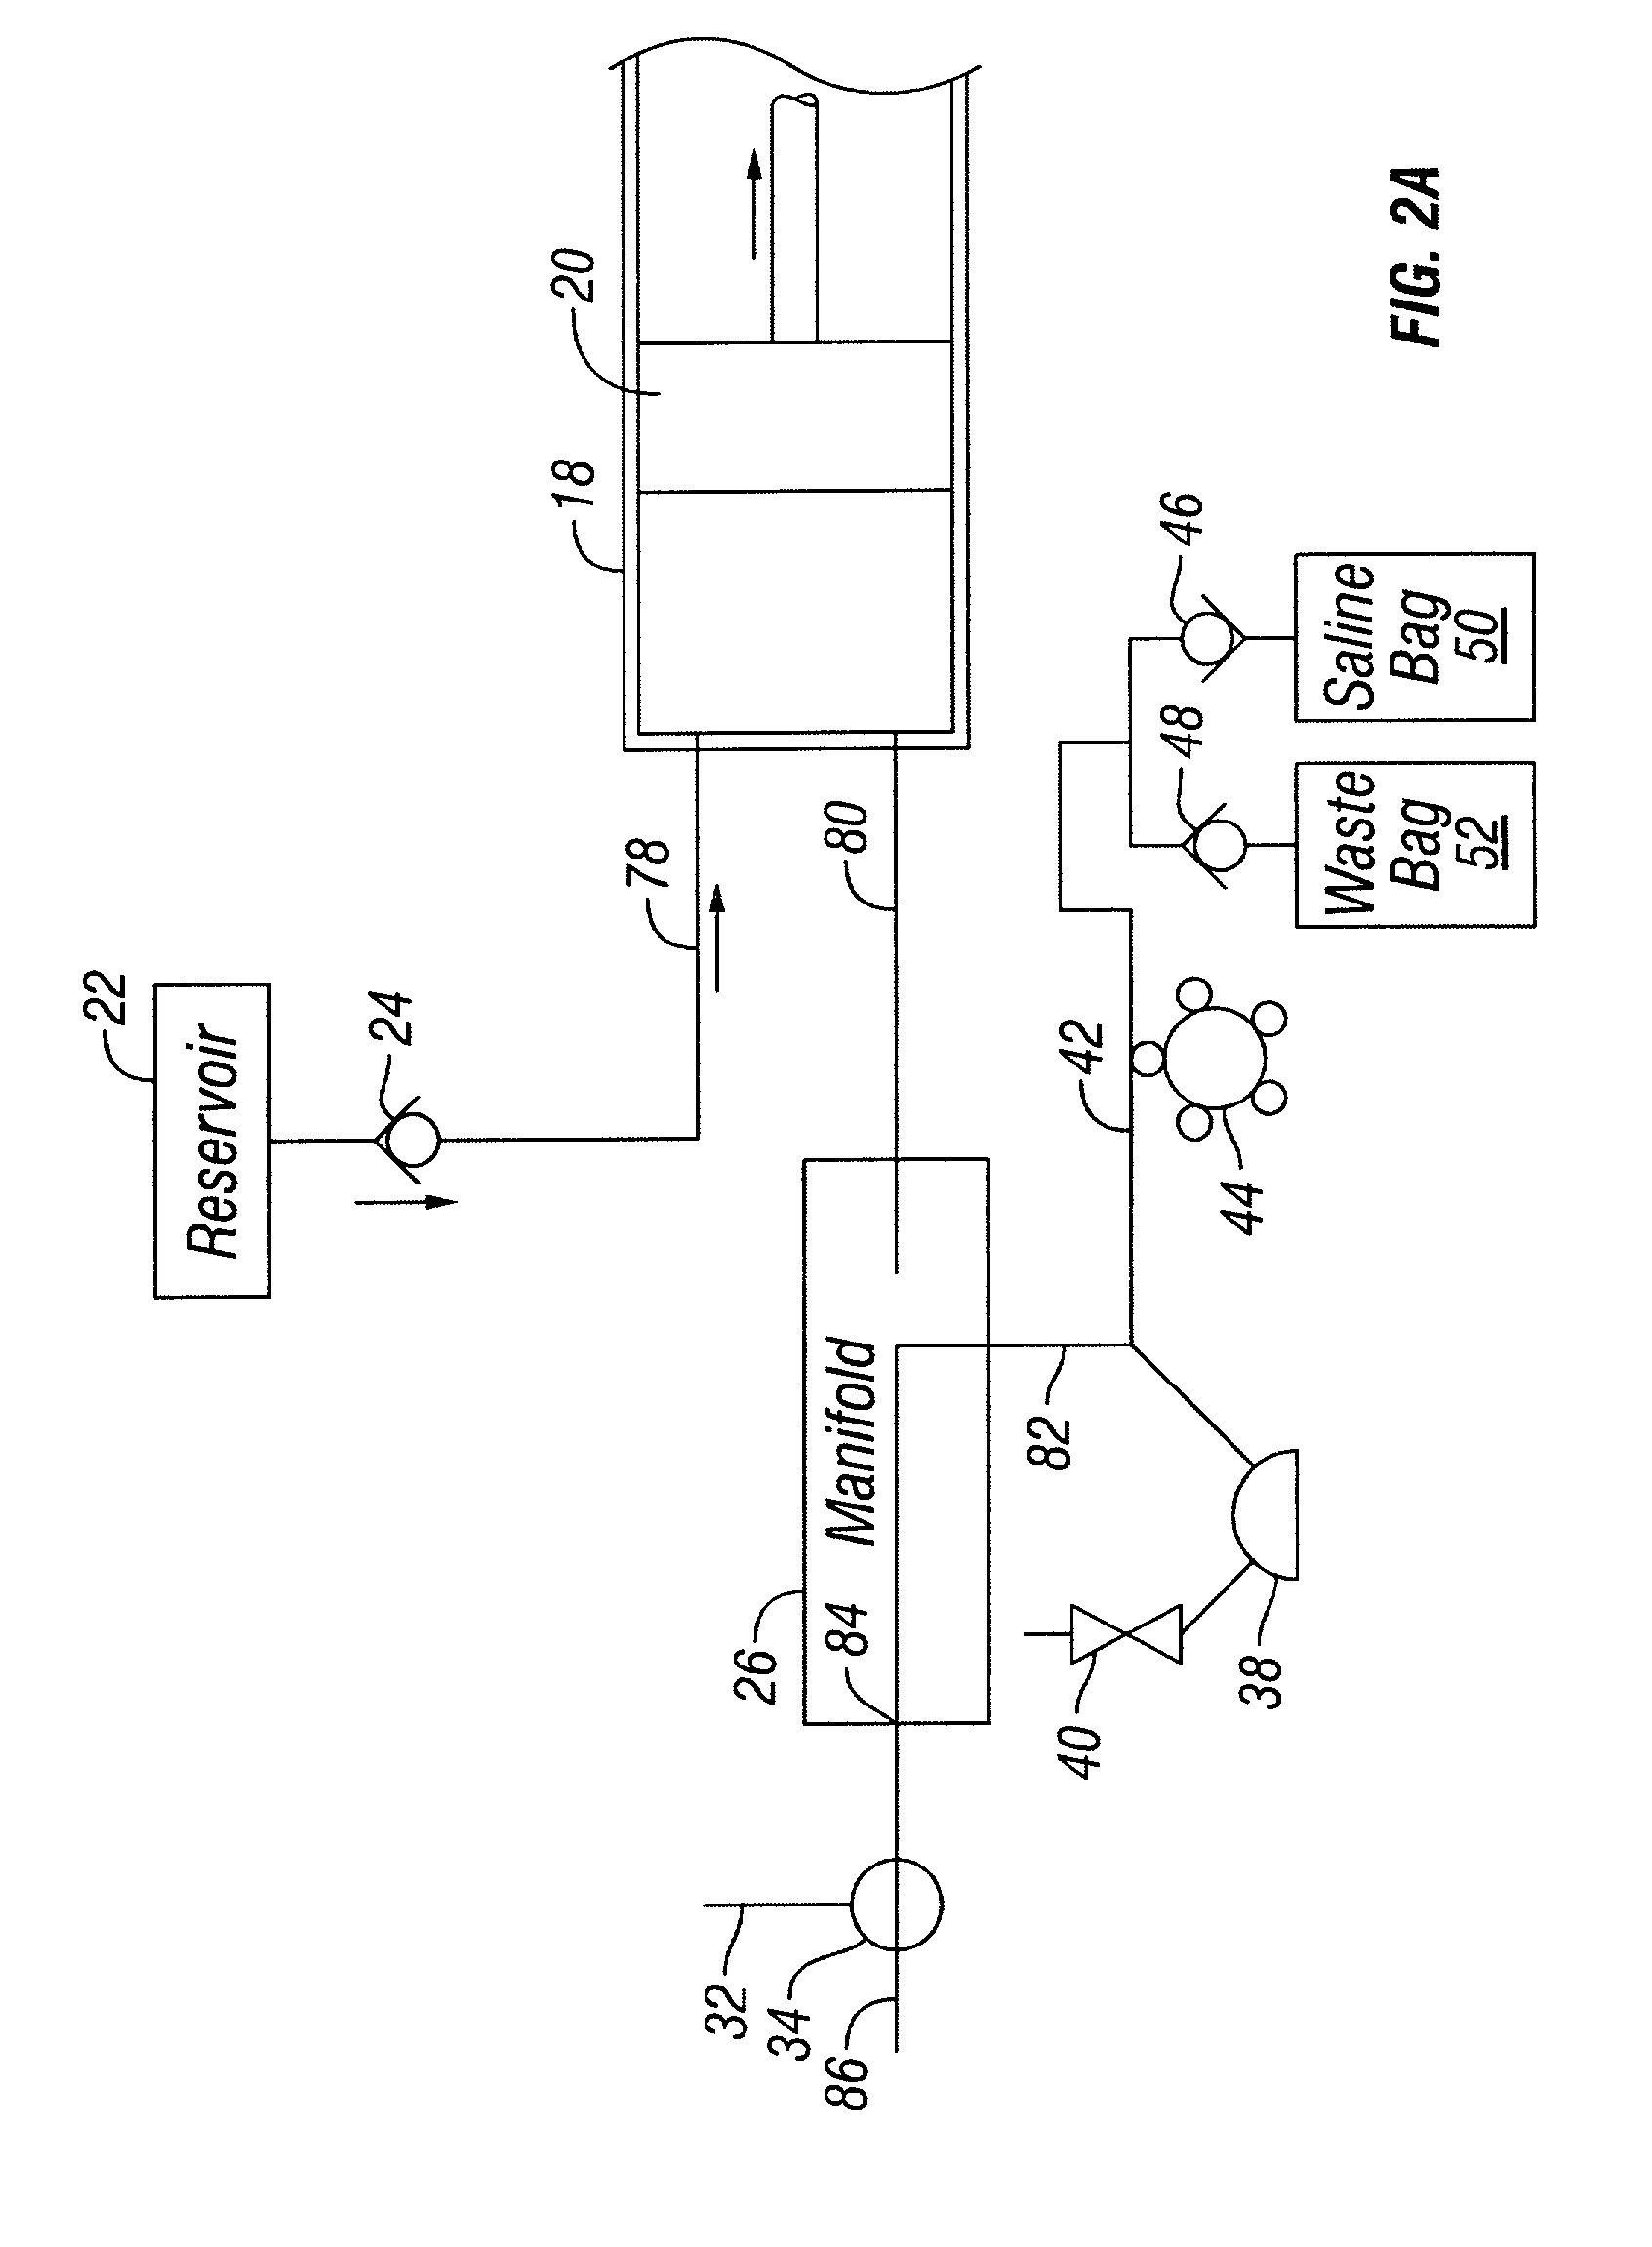 Angiographic injector system and method of use